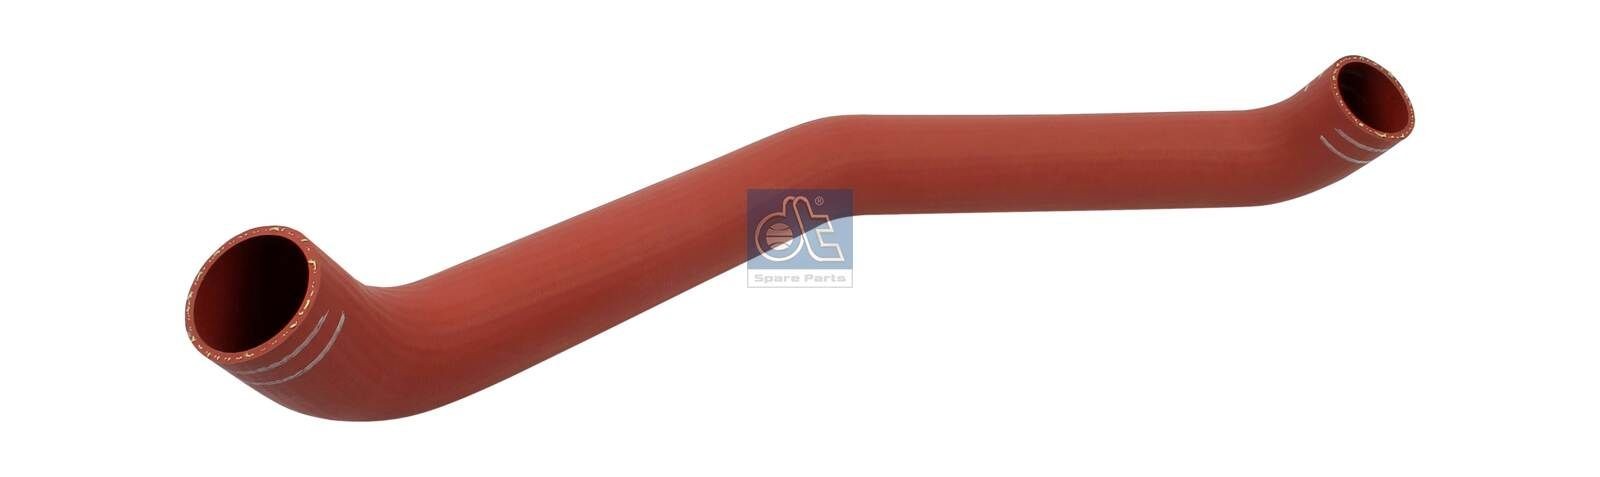 Iveco Radiator Hose DT Spare Parts 7.21381 at a good price